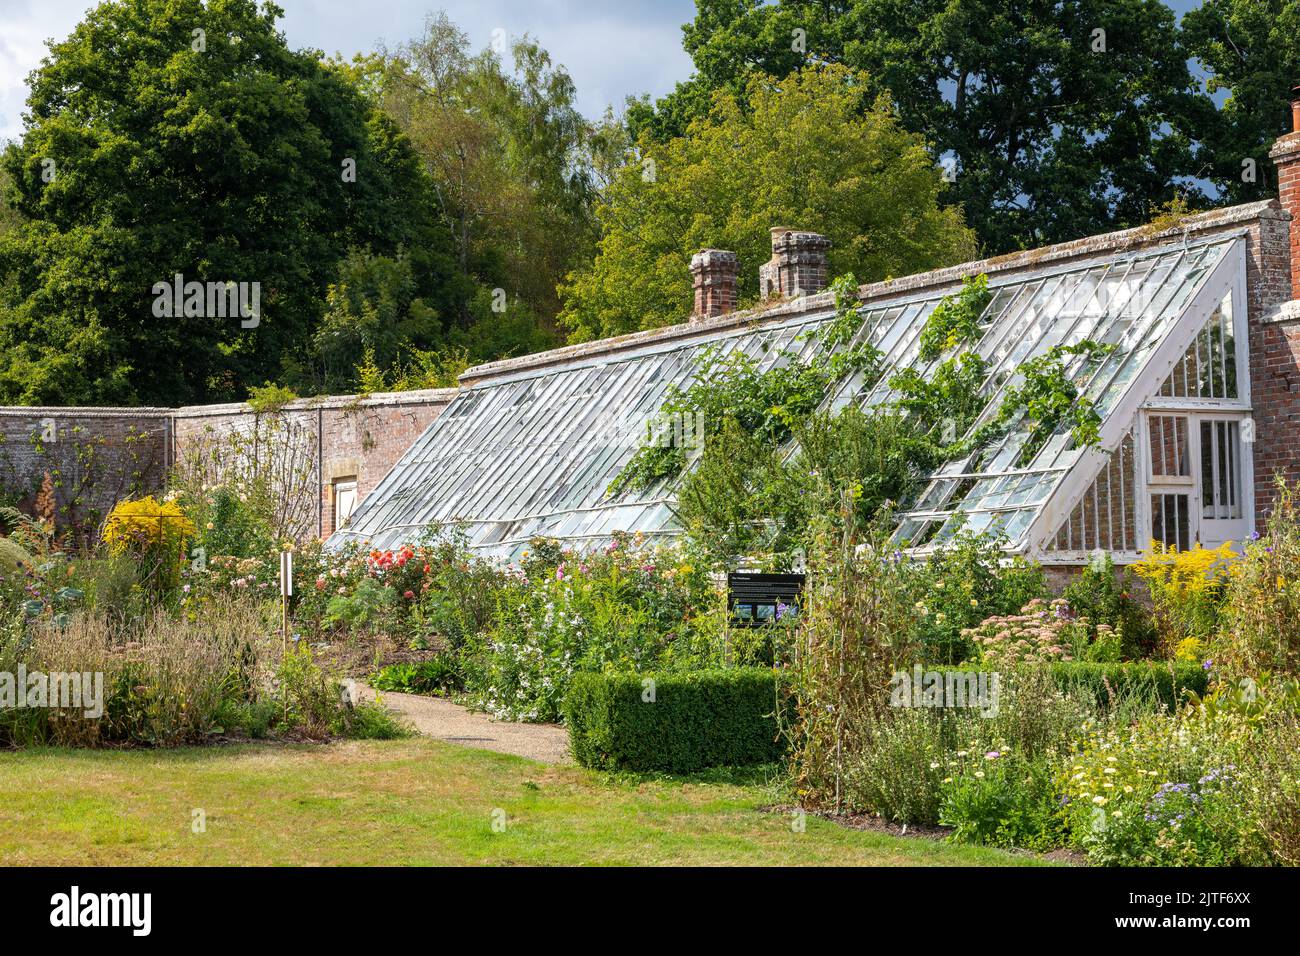 Am overgrown greenhouse in the walled garden at Scotney Castle and gardens, Kent. Managed by the National Trust Stock Photo